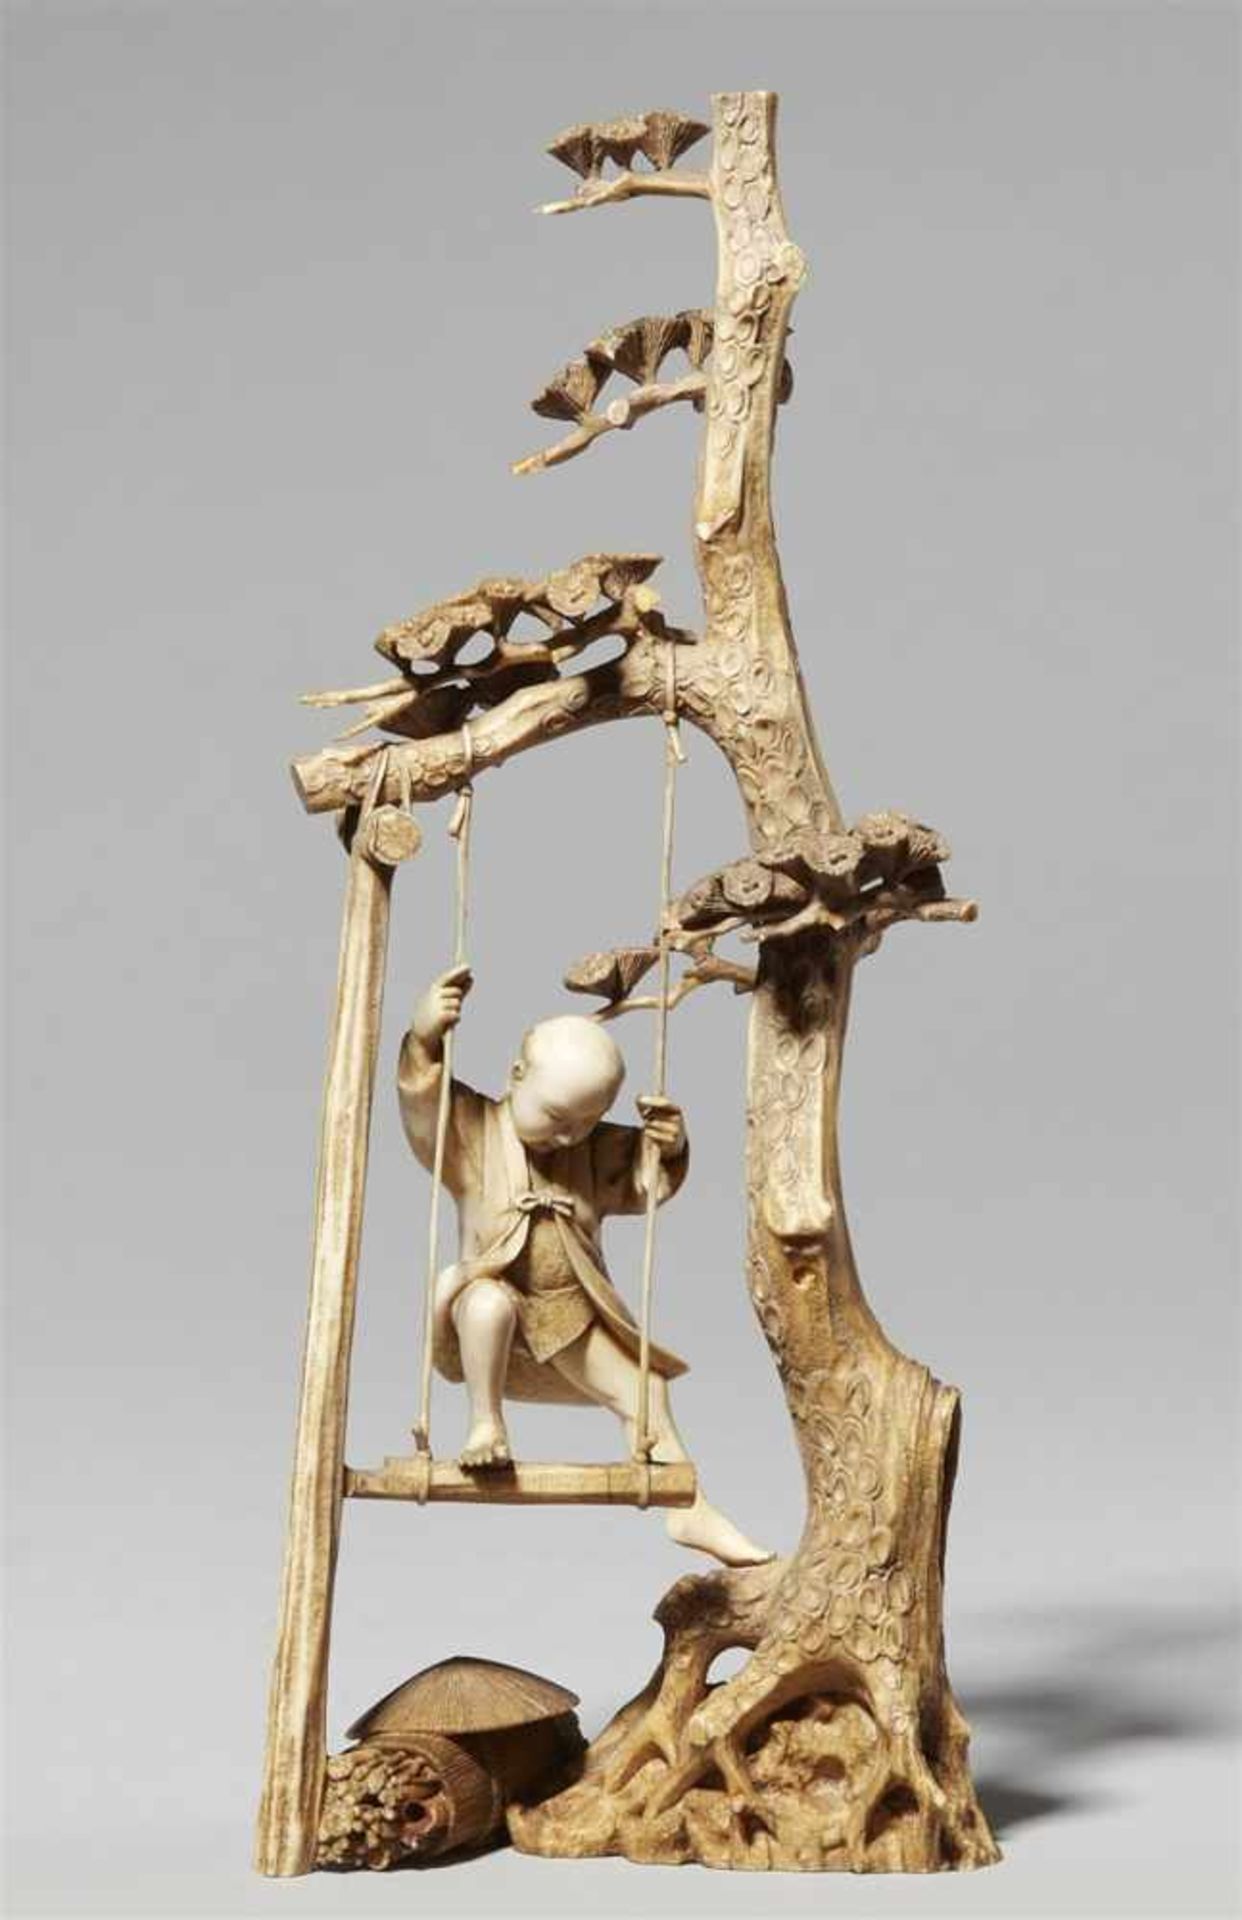 An ivory okimono of a boy on a swing. Late 19th century